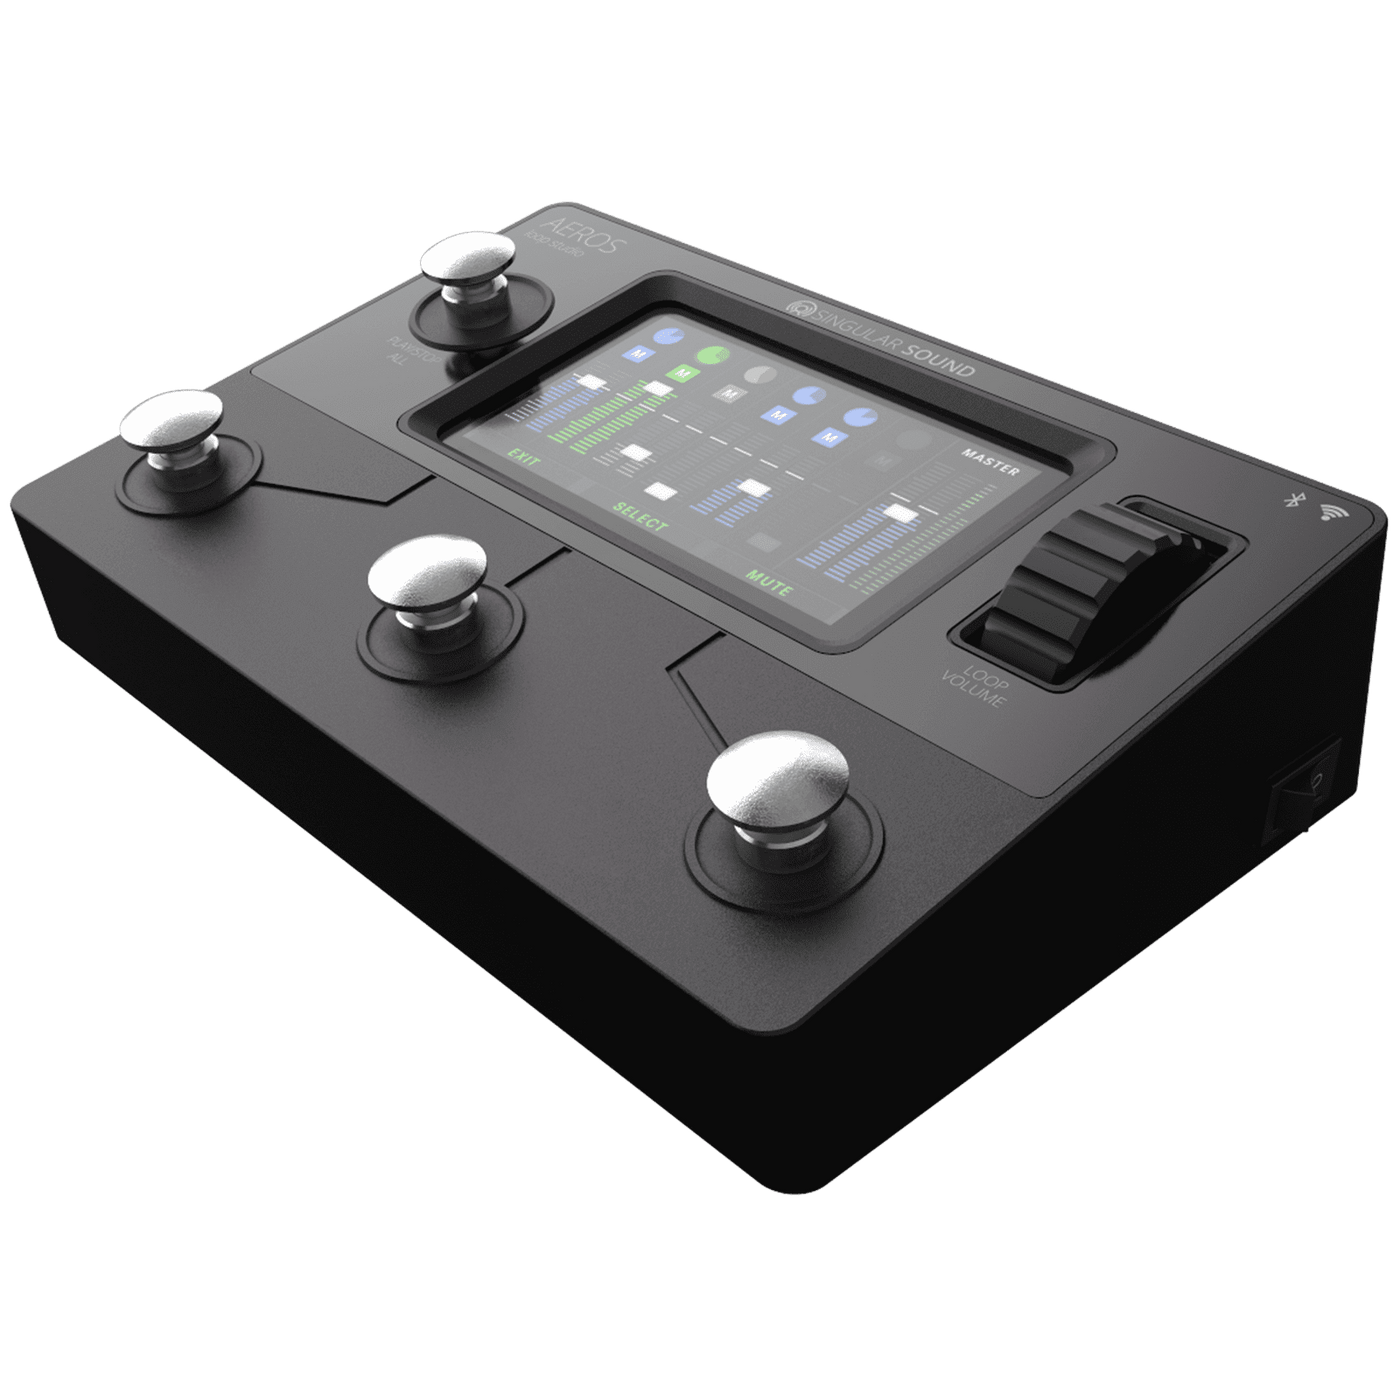 Singular Sound Aeros Loop Studio - 6 Track, Stereo Looper Pedal with Touch Enabled Screen, Hands Free Mixing, and Simultaneous Parallel and Sequential Looping - SlapStore América Latina especialistas en Bajos de Chile a todo América Latina